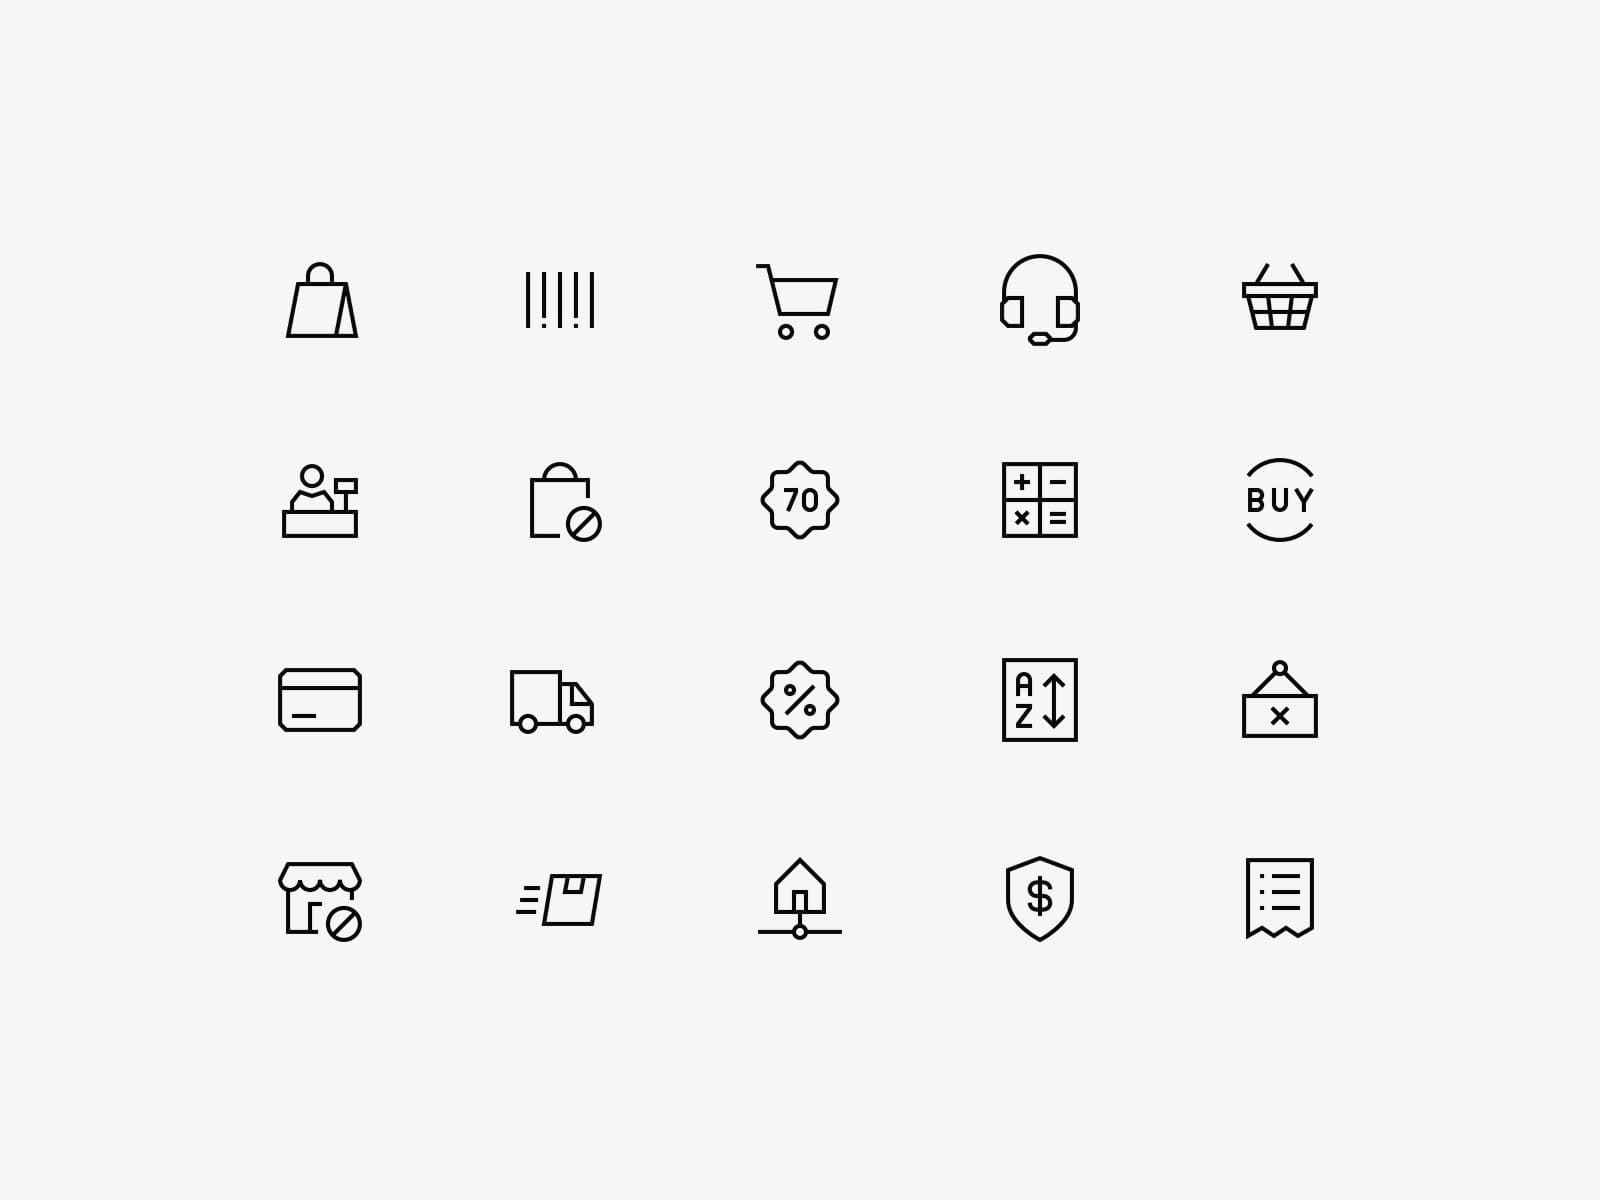 Angular Icons - Shopping Pack 24px dennis snellenberg download ecommerce ecommerce icons free grid icon pack icons icons pack iconset line netherlands shopping icons svg